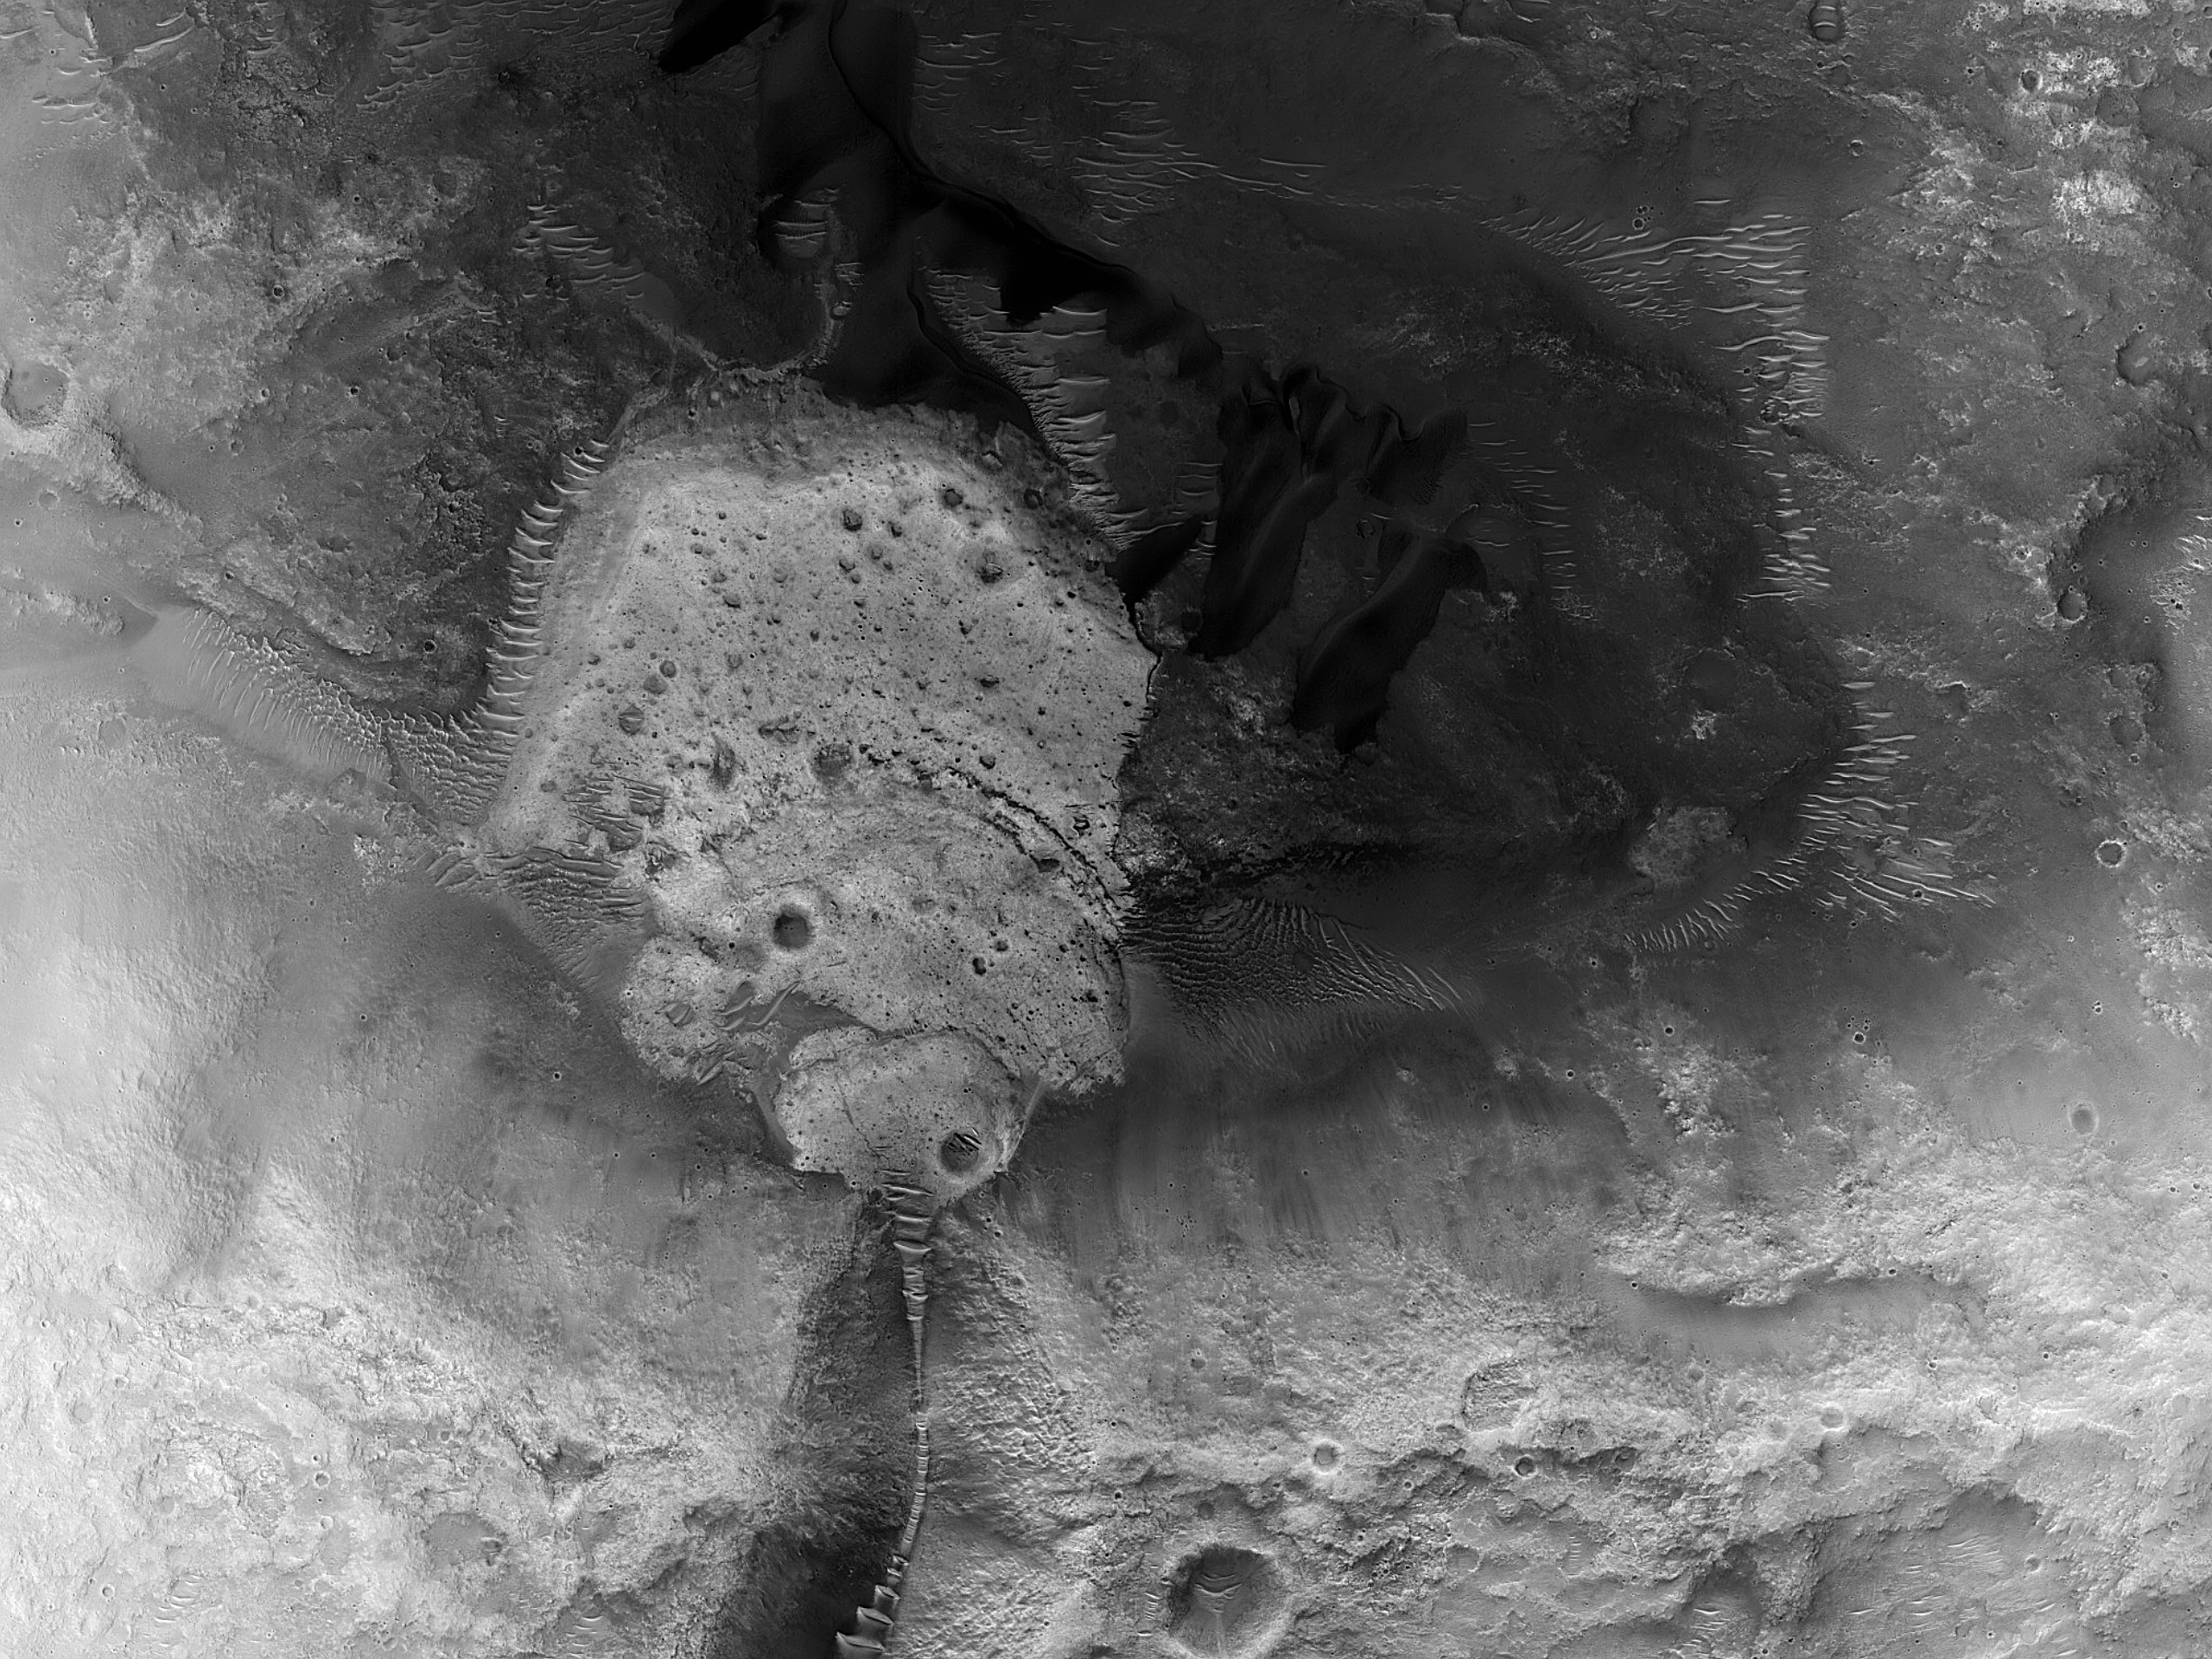 Fan in a Southern Highlands Crater